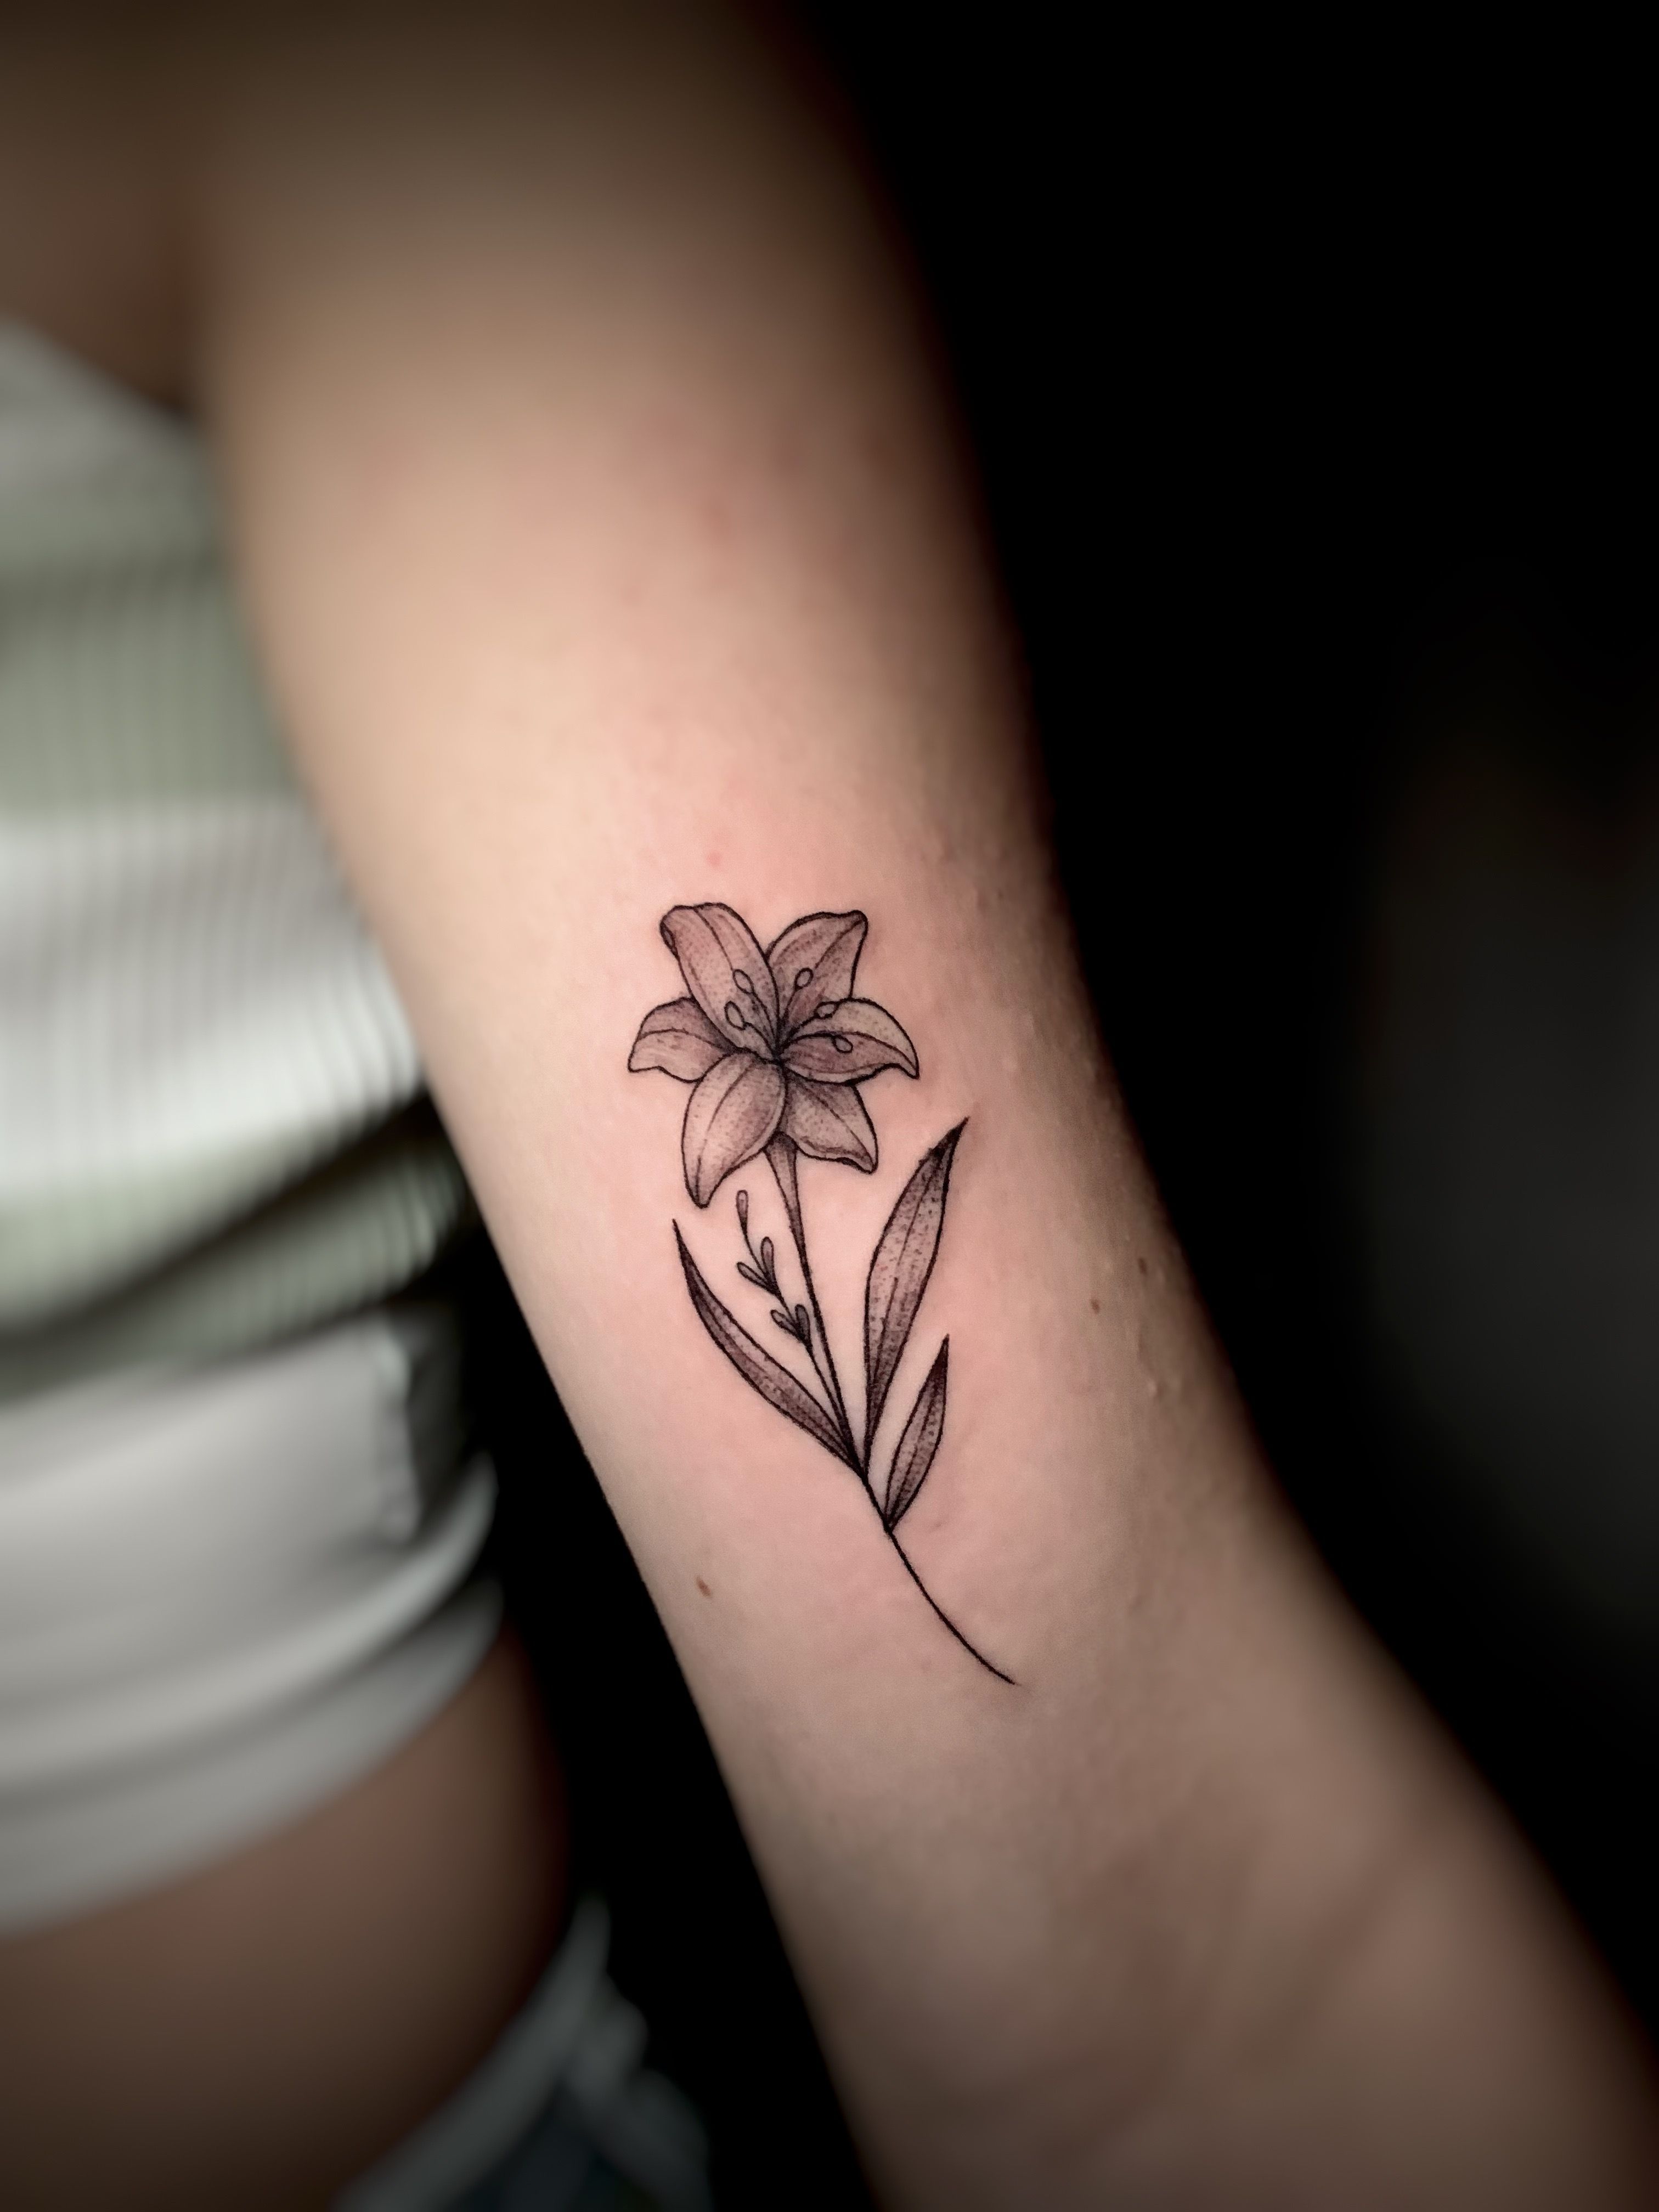 Tattoo tagged with: flower, small, tiny, ifttt, little, nature, inner  forearm, tattooistflower, medium size, red spider lily, illustrative |  inked-app.com